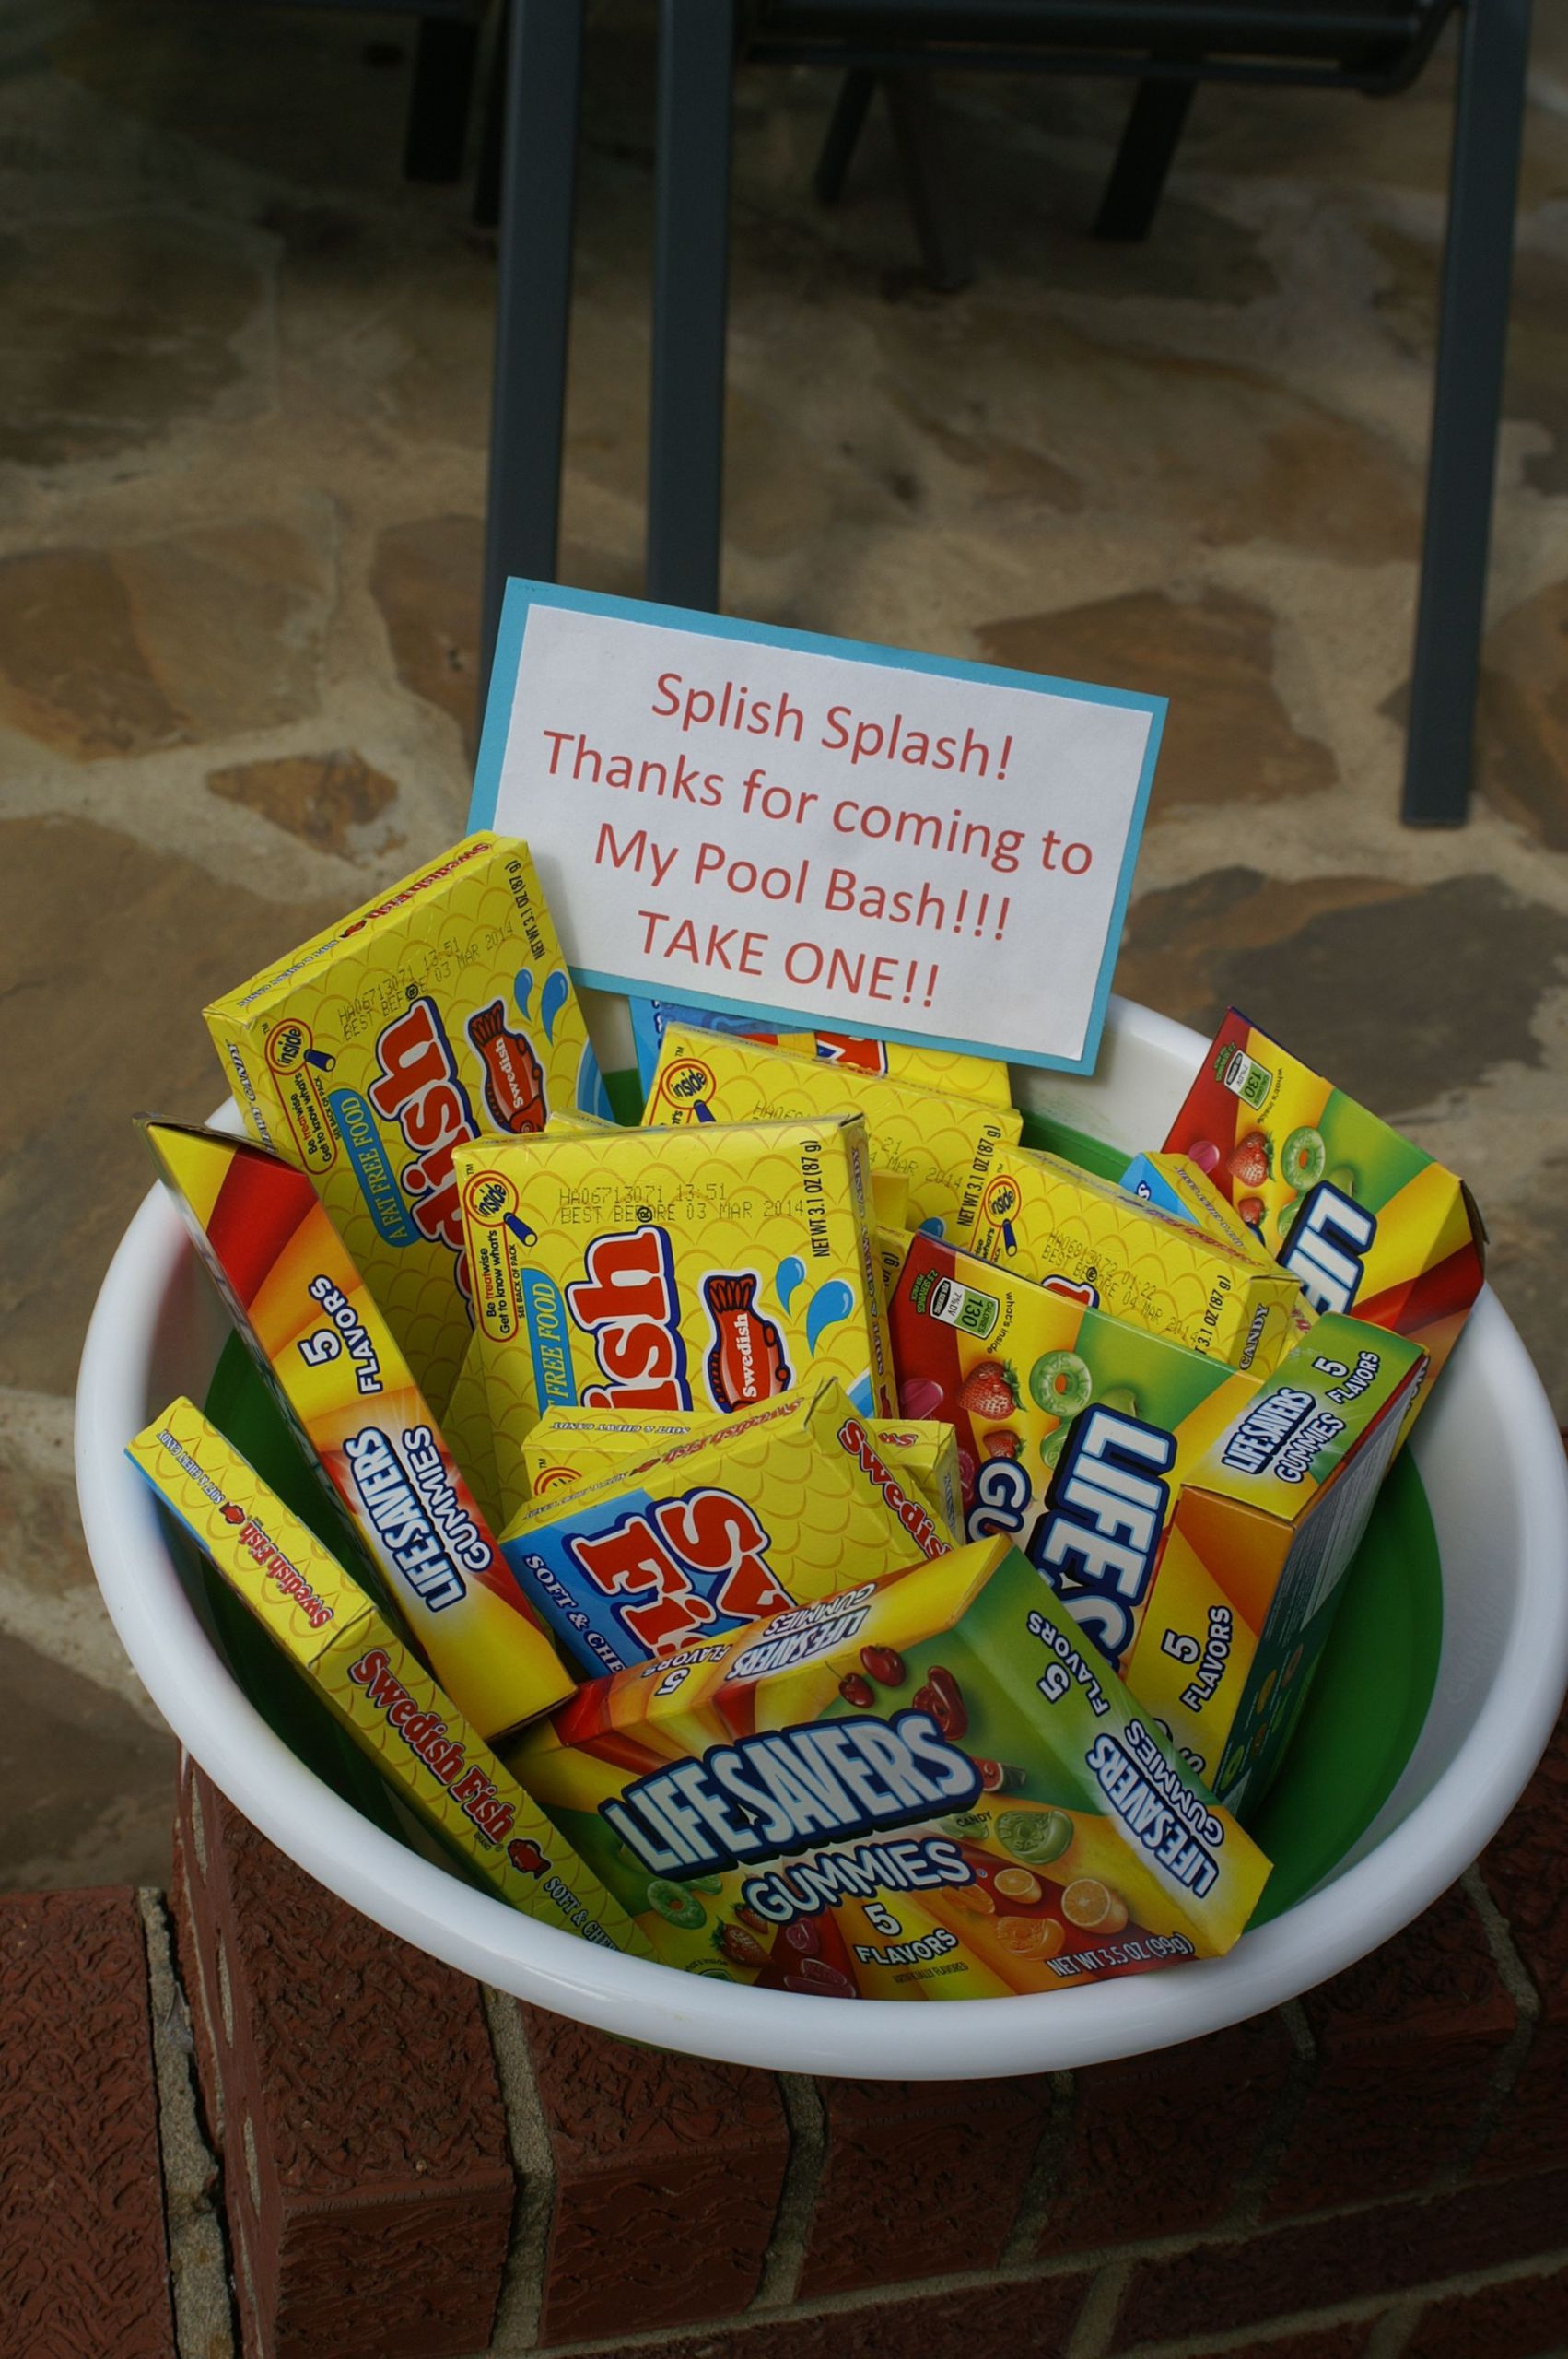 Beach Birthday Party Ideas For Kids
 party favors for pool beach party eping it simple